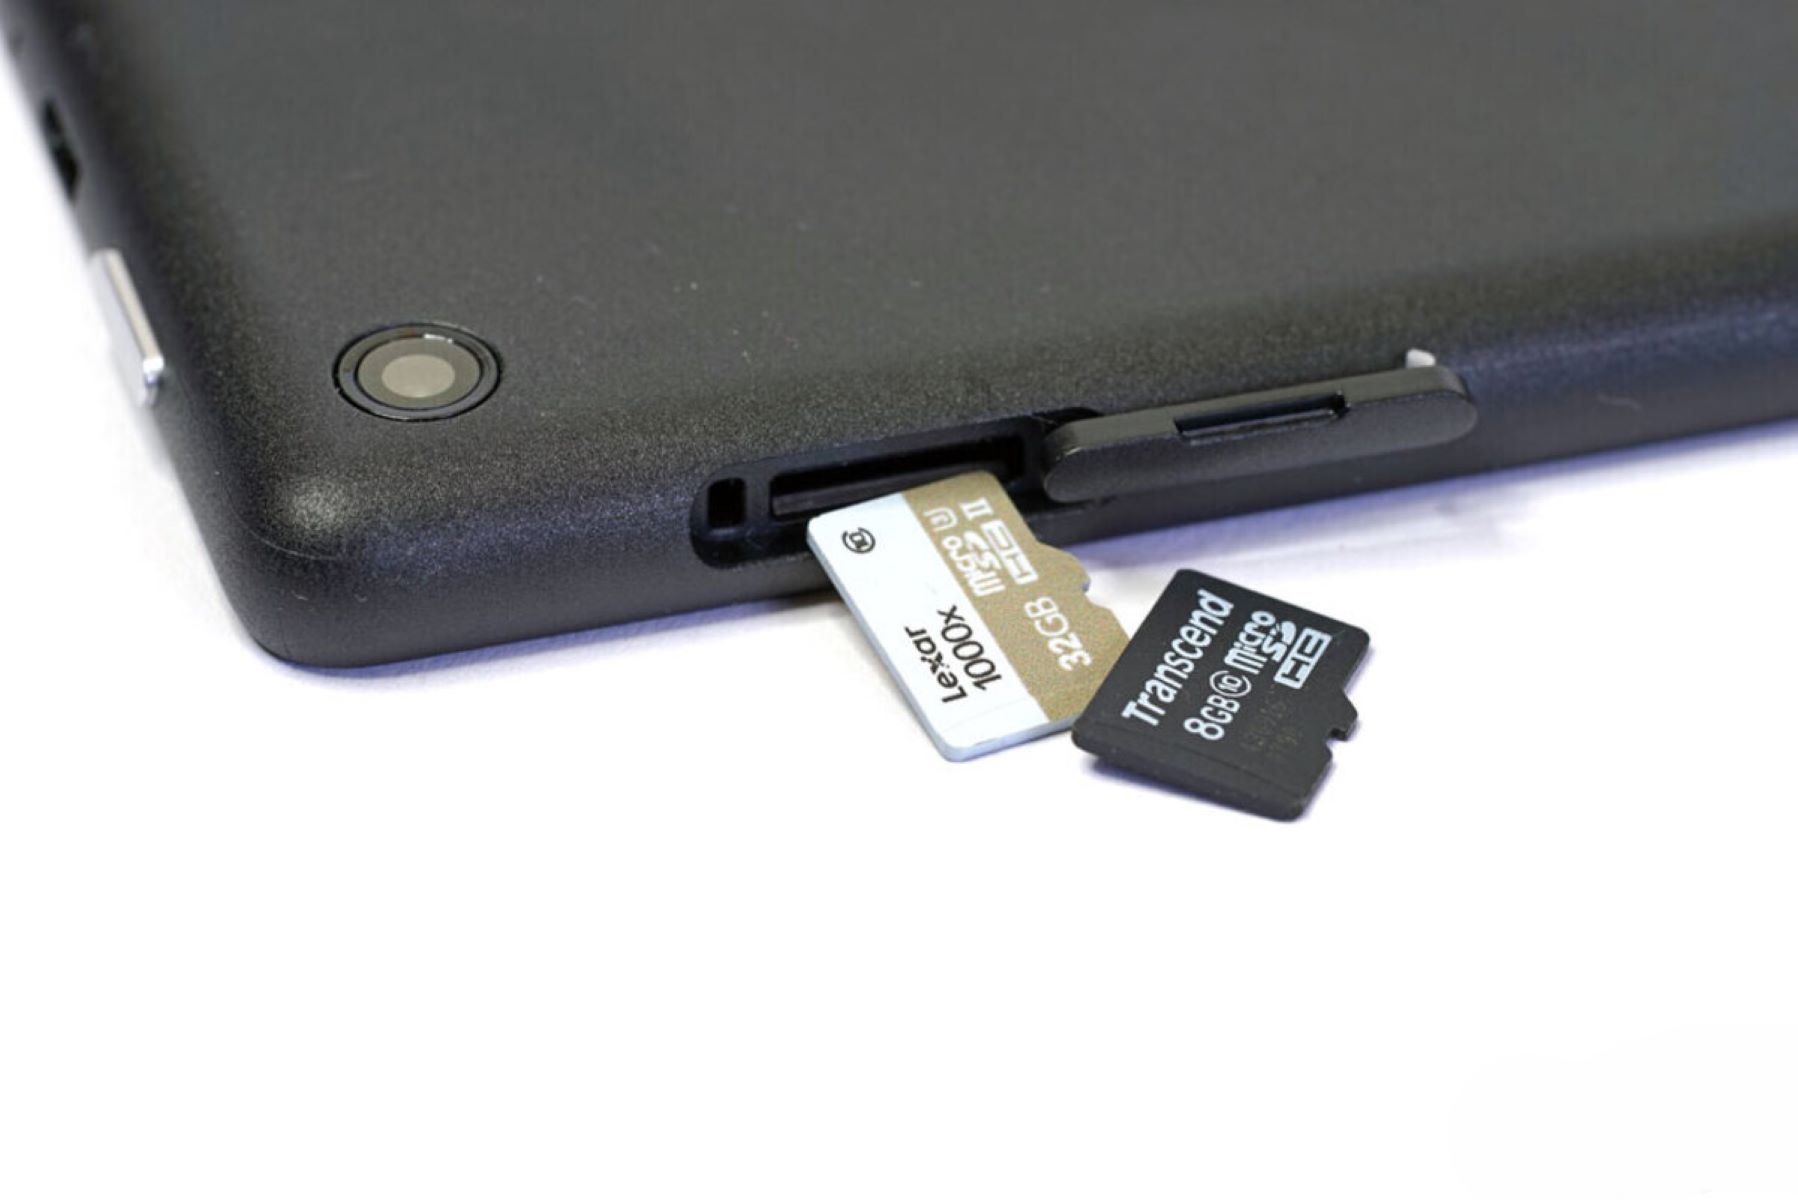 How To Insert SD Card In Kindle Fire